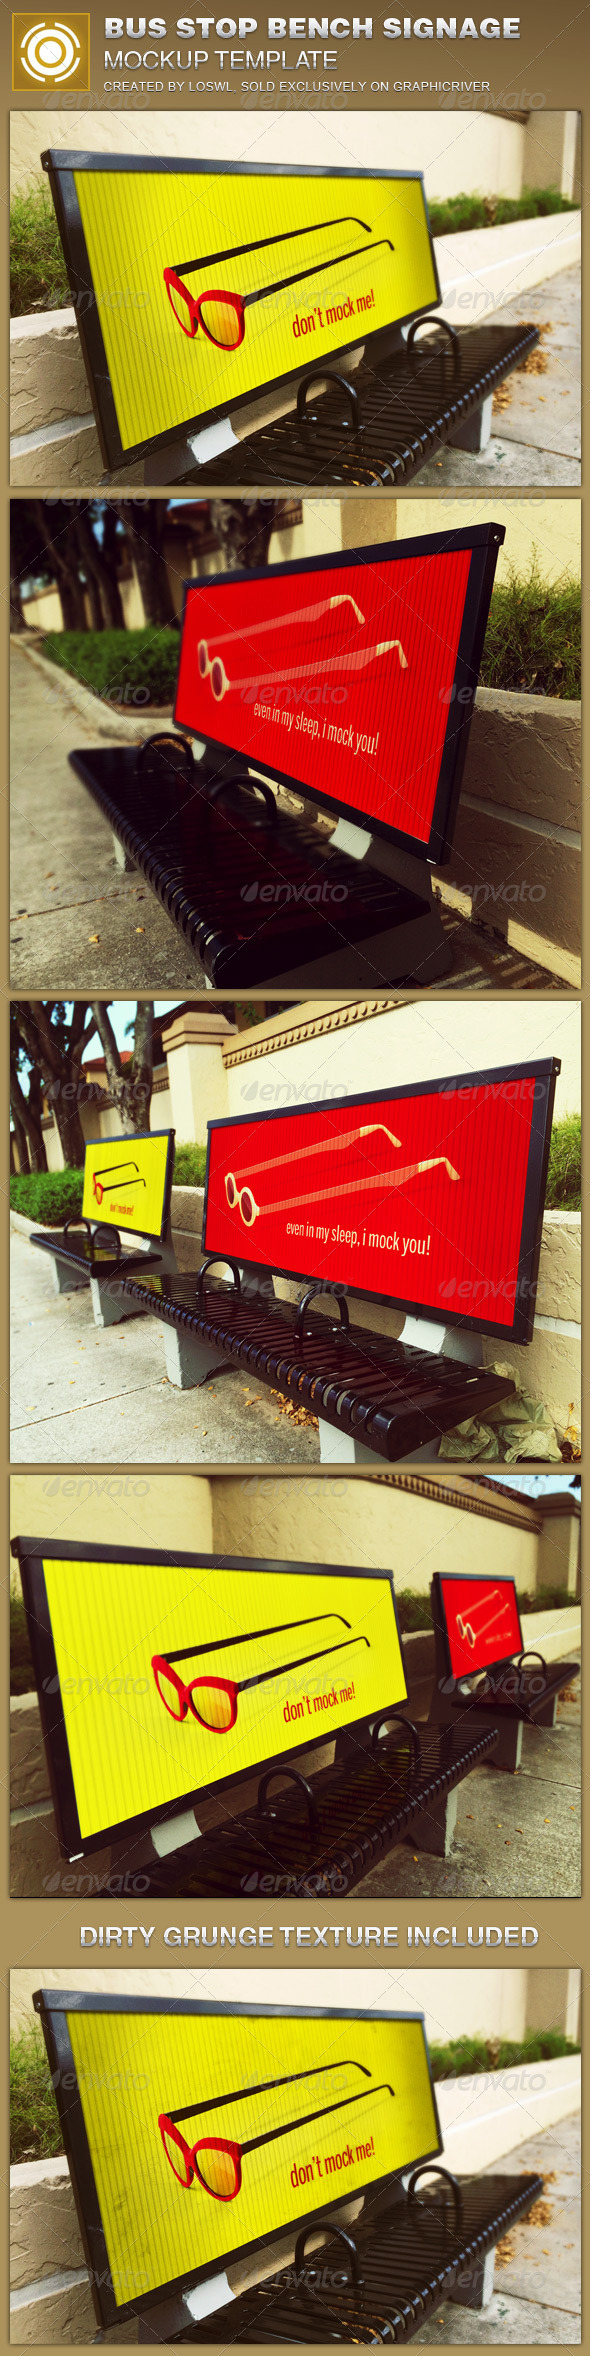 Corrugated-Bus-Stop-Bench-Signage-Mockup-Image-Preview.jpg